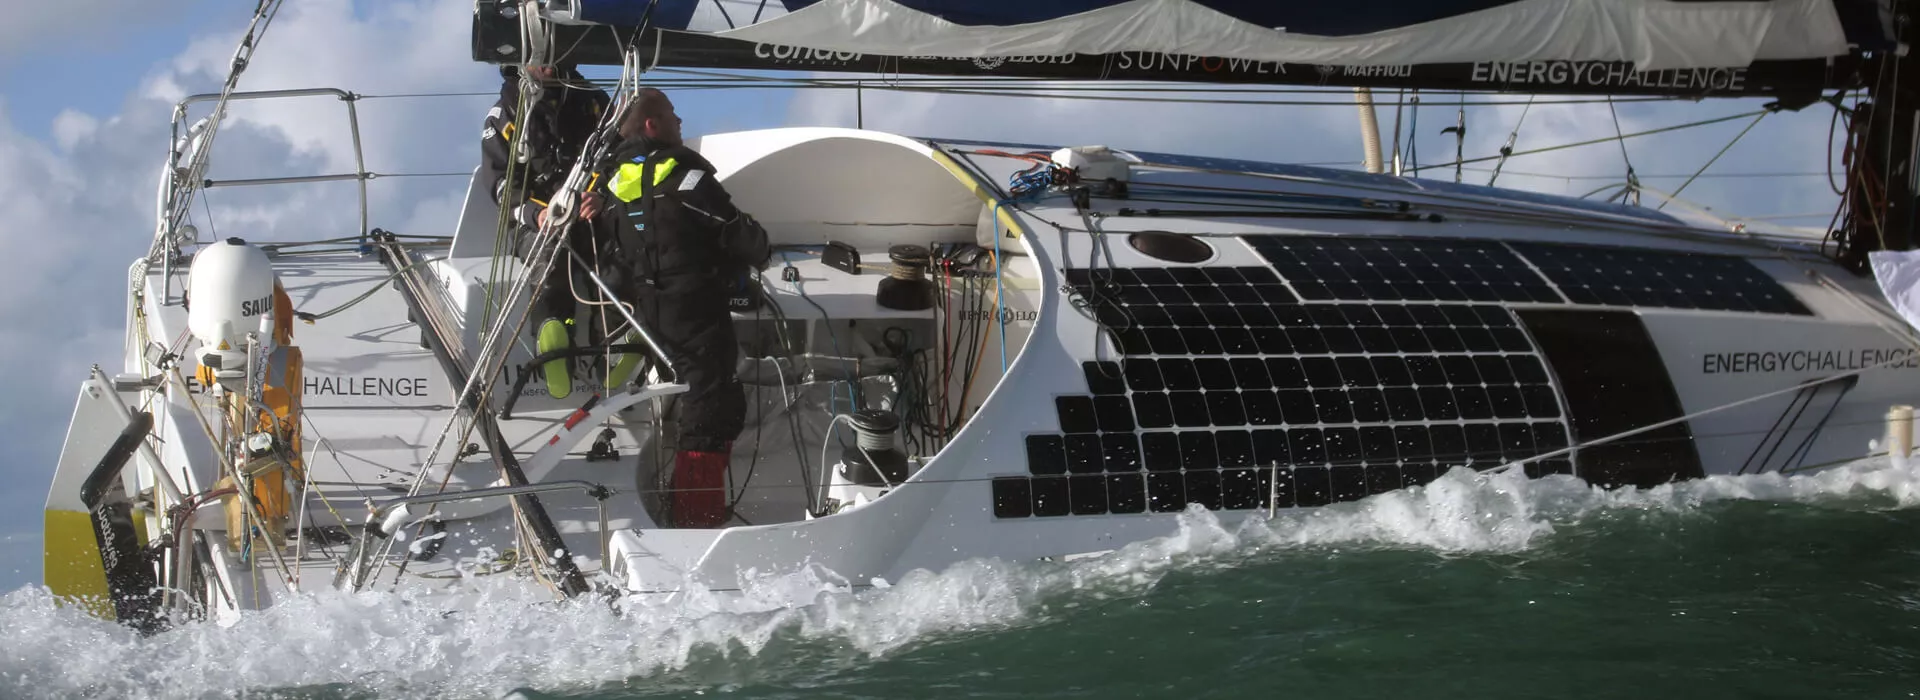 Phil Sharp racing a solar-powered boat